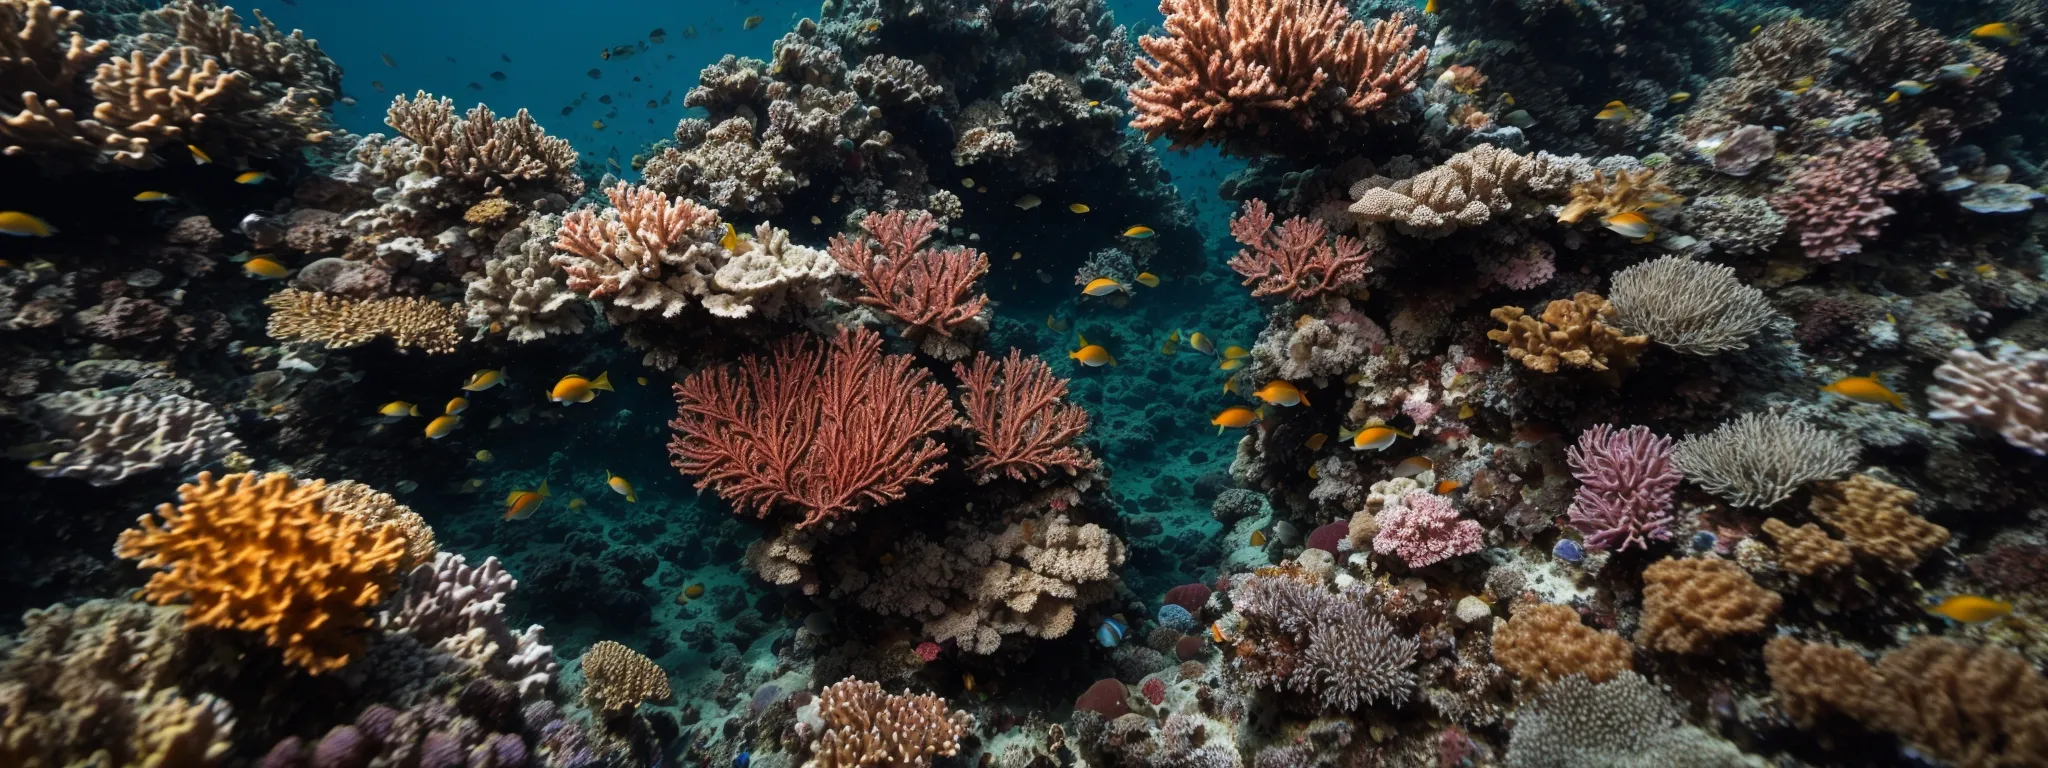 a scuba diver explores a vibrant coral reef, suggesting discovery and depth.